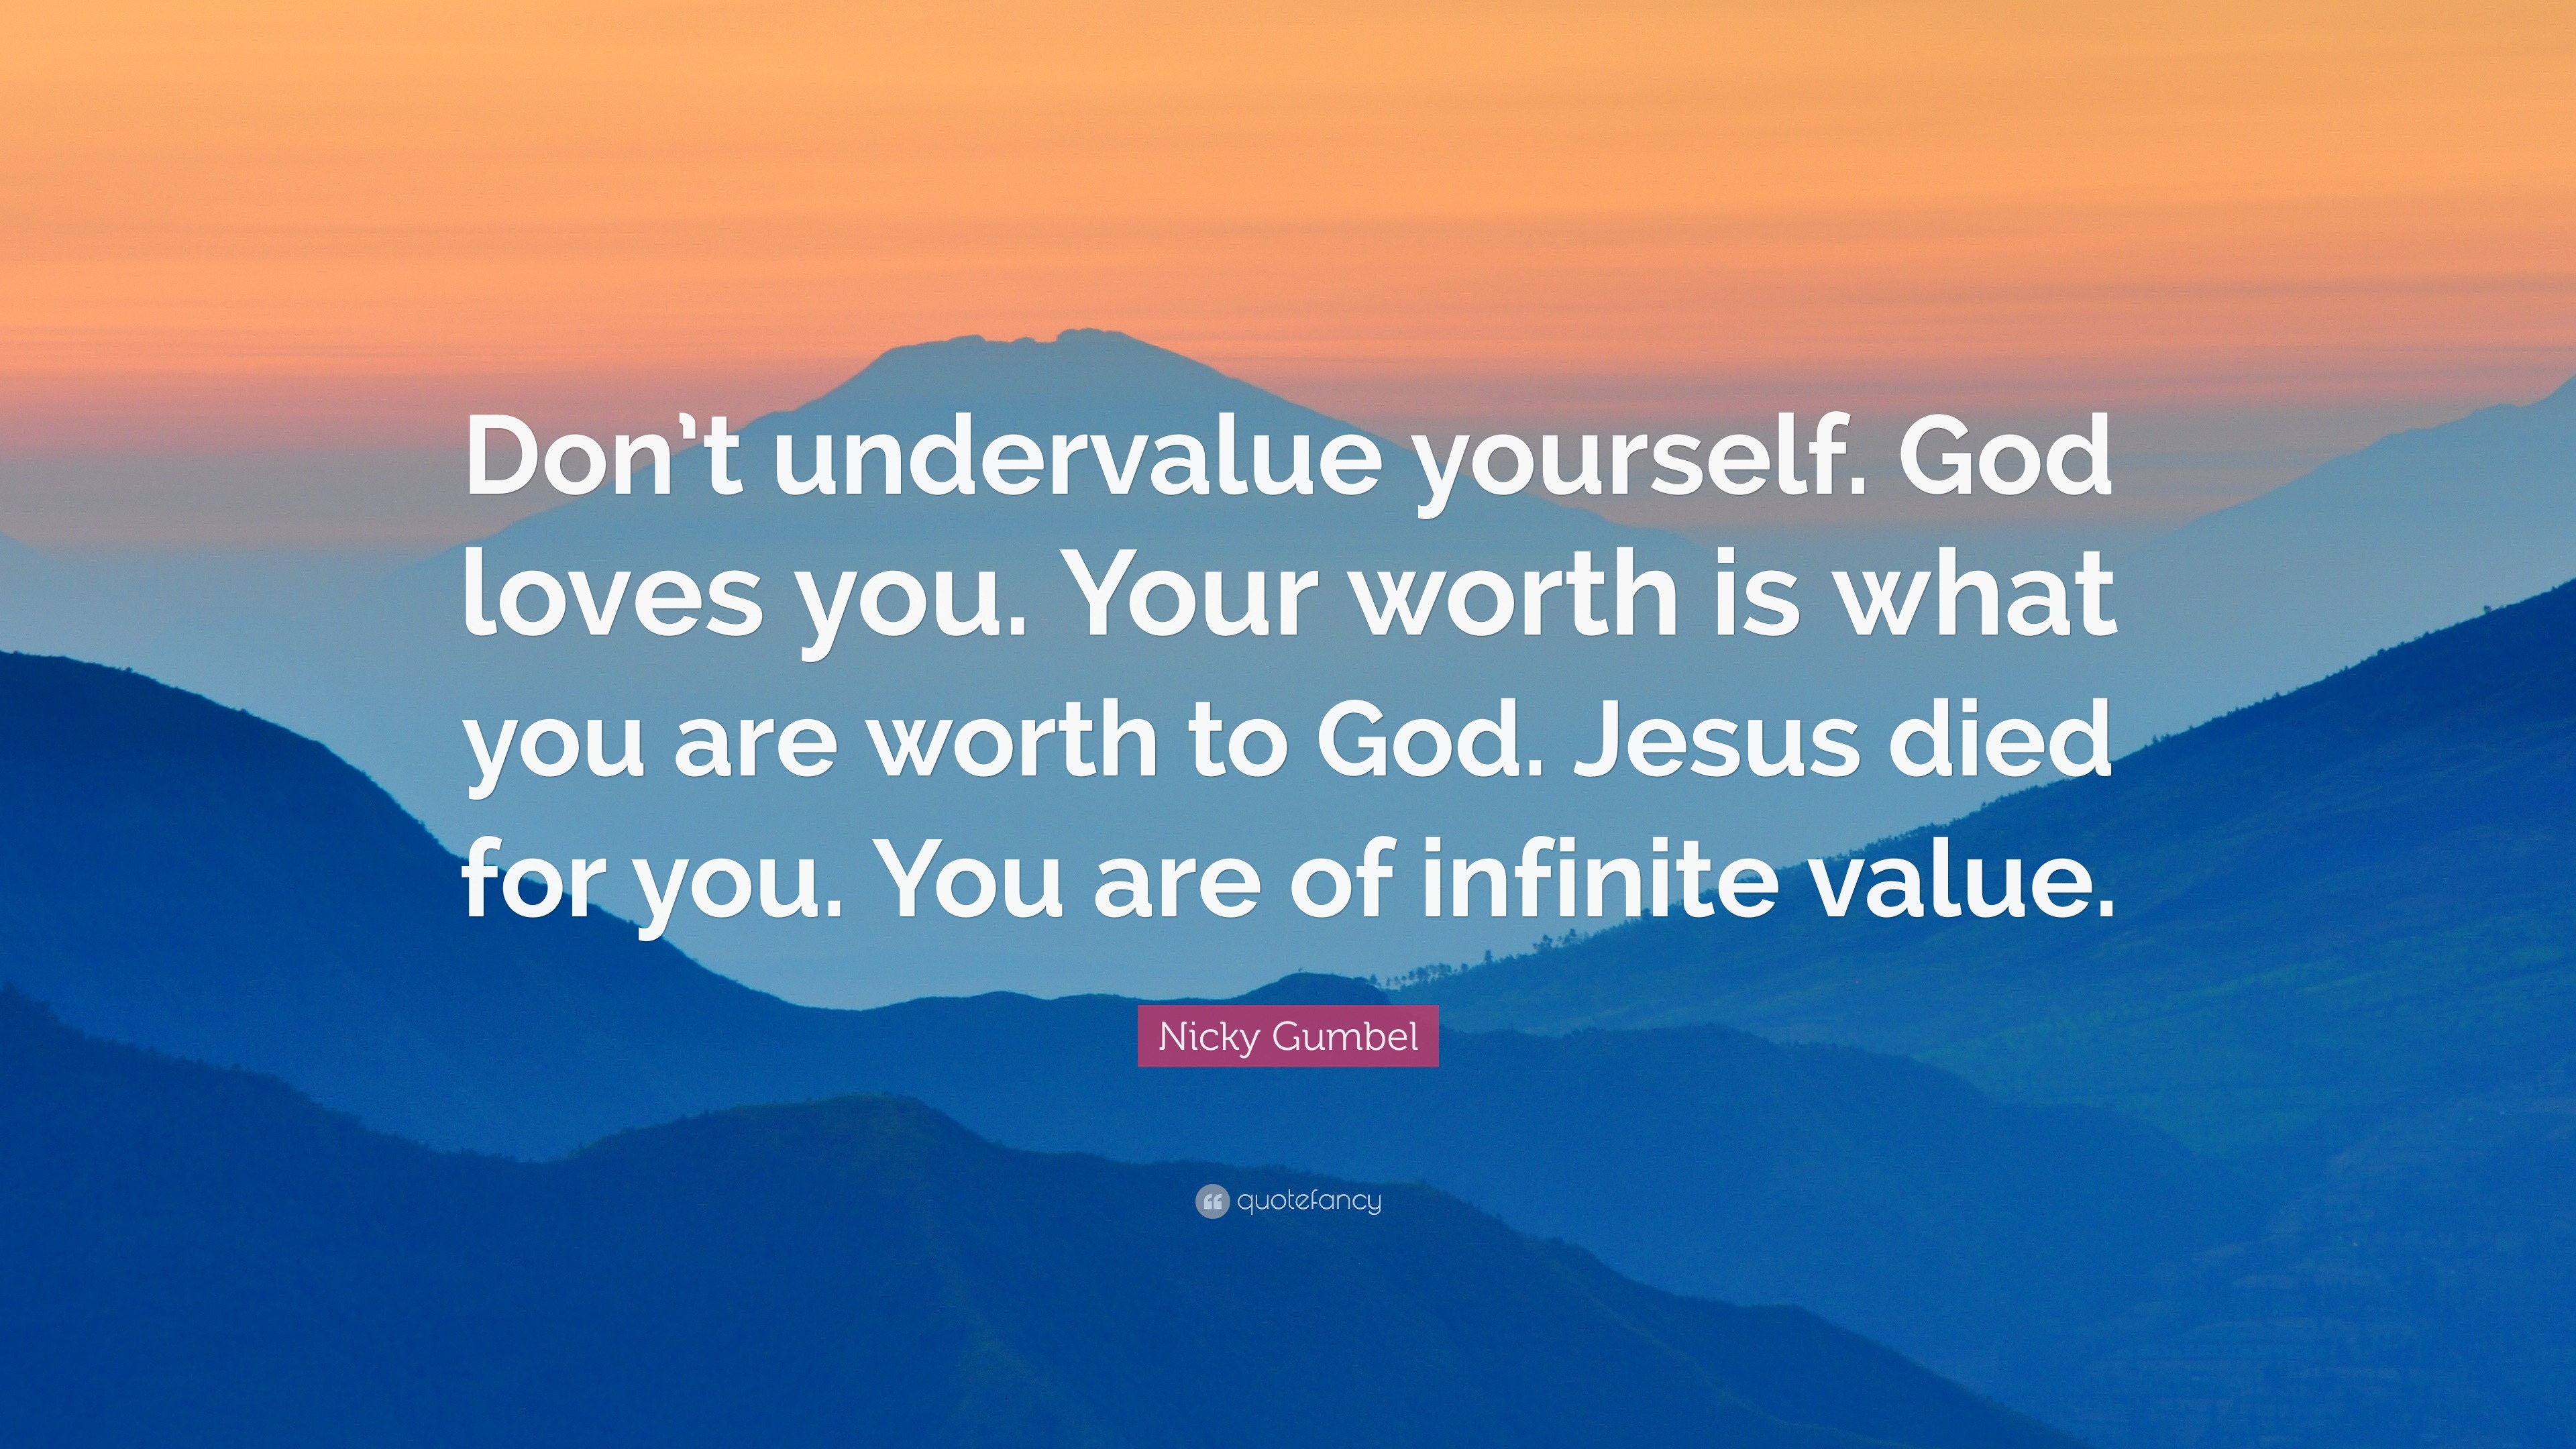 Nicky Gumbel Quote “Don t undervalue yourself God loves you Your